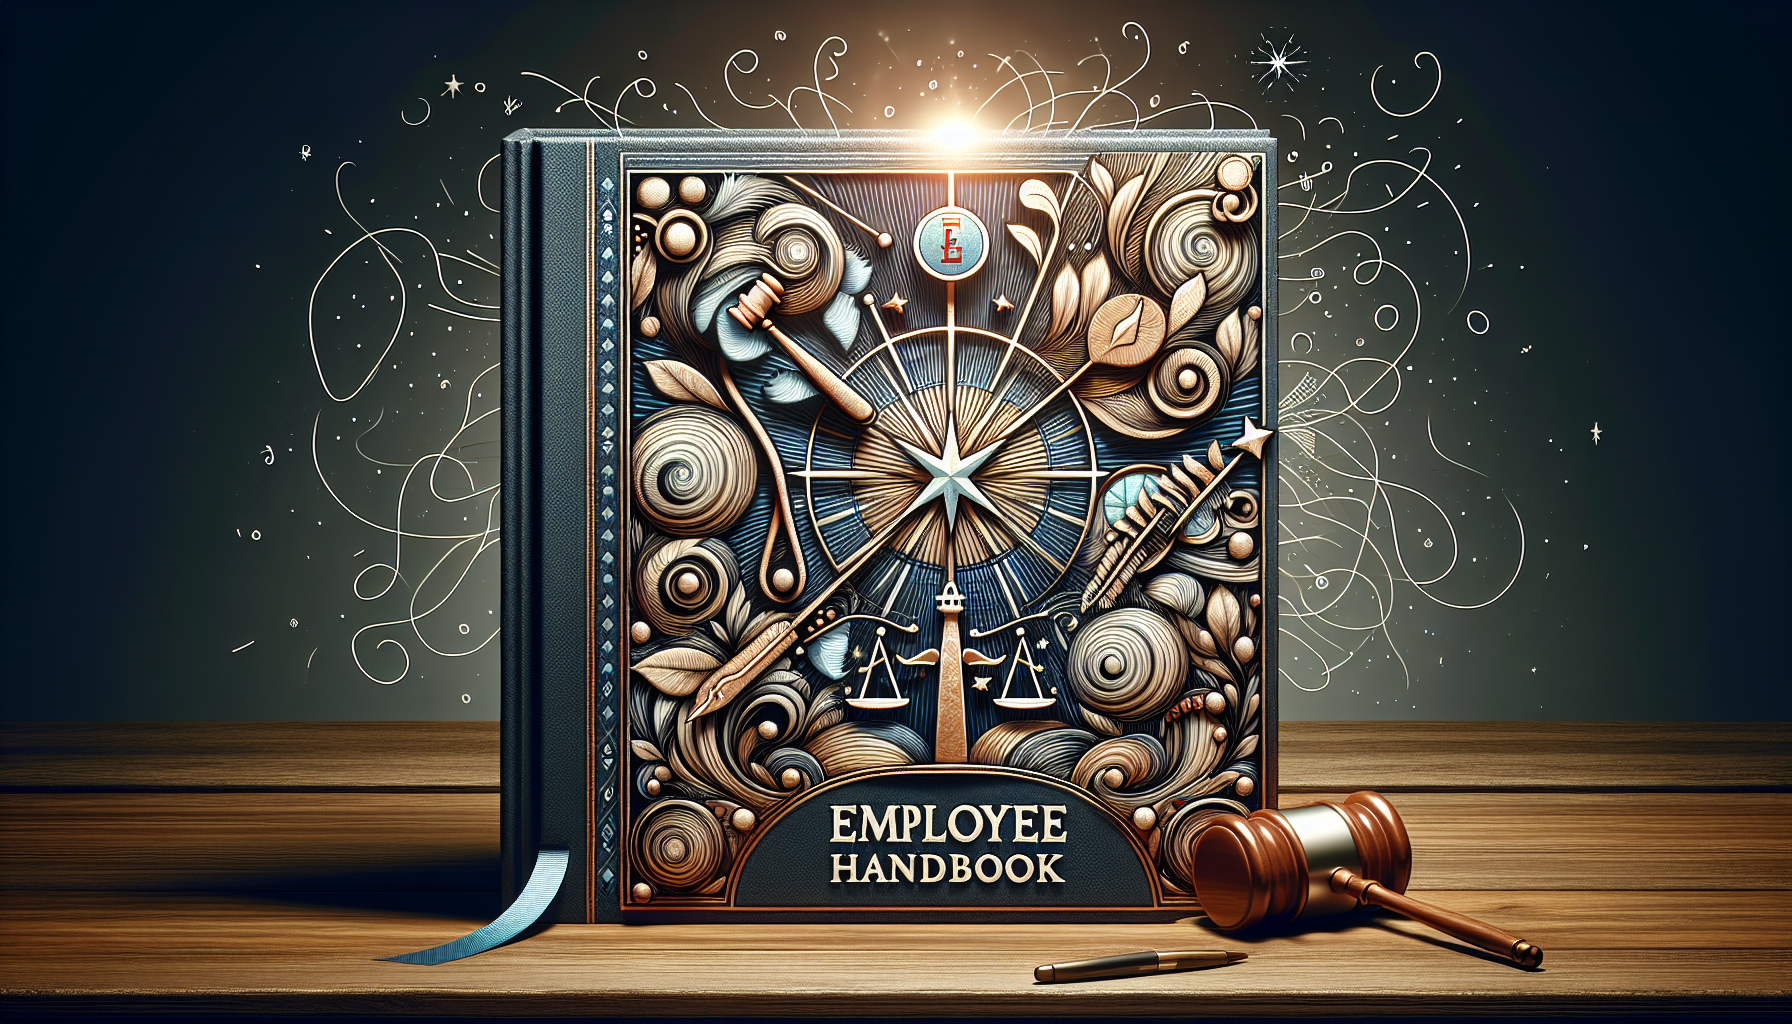 Illustration of a well-crafted employee handbook